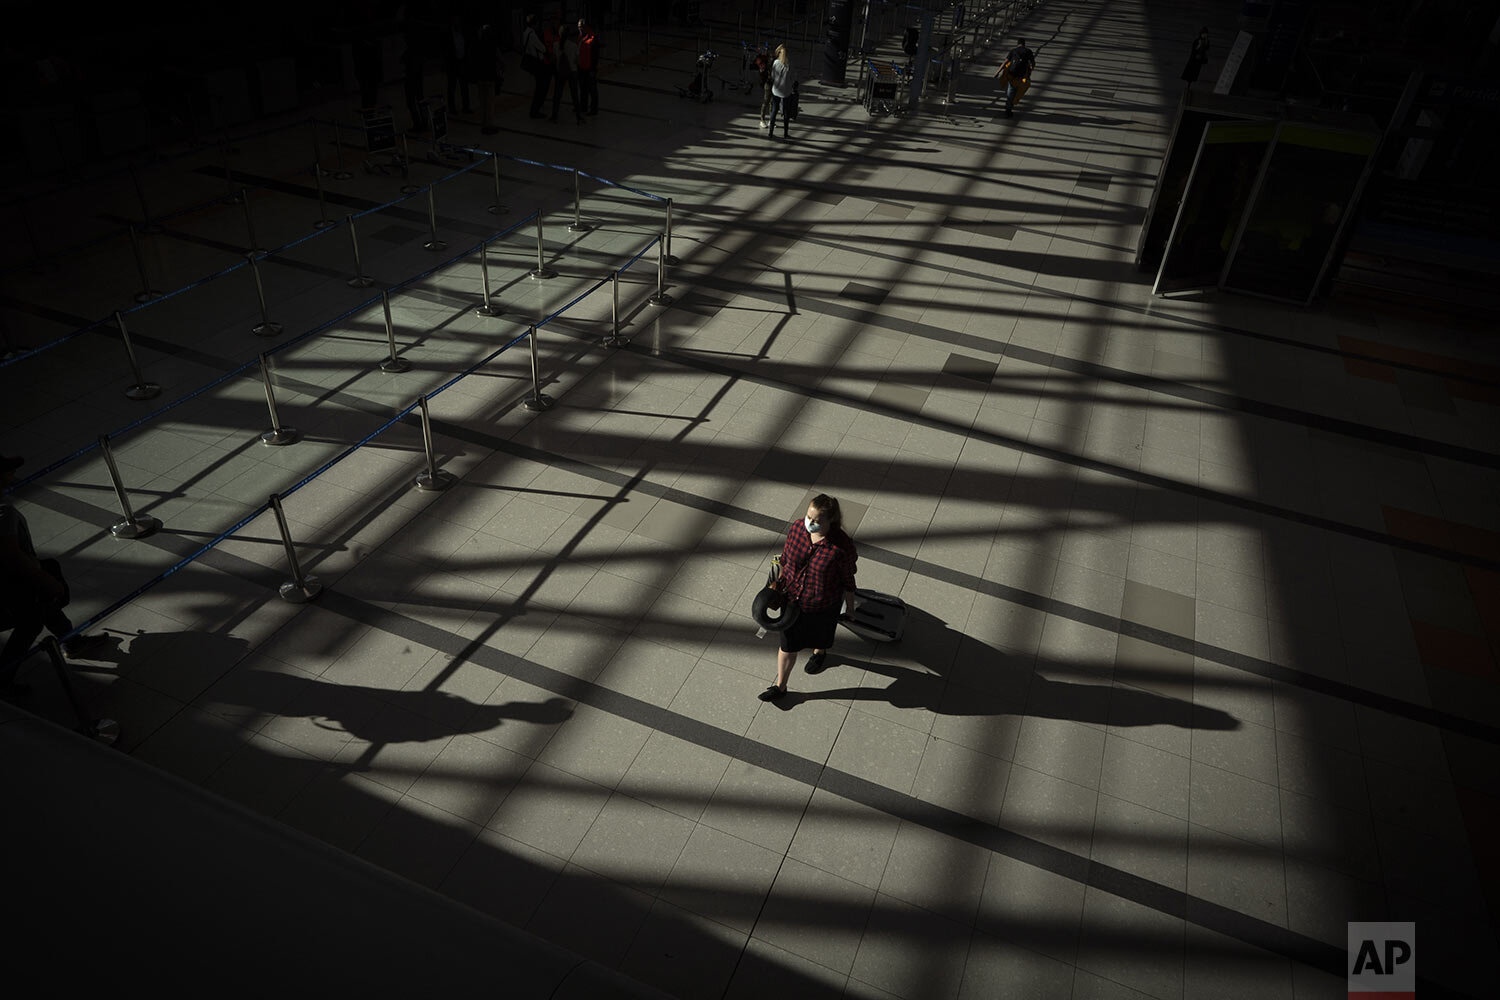  A passenger walks through an empty terminal at Ezeiza International Airport in Buenos Aires, Argentina, March 23, 2020, as most flights are canceled to help stop the spread of the new coronavirus. (AP Photo/Victor R. Caivano) 